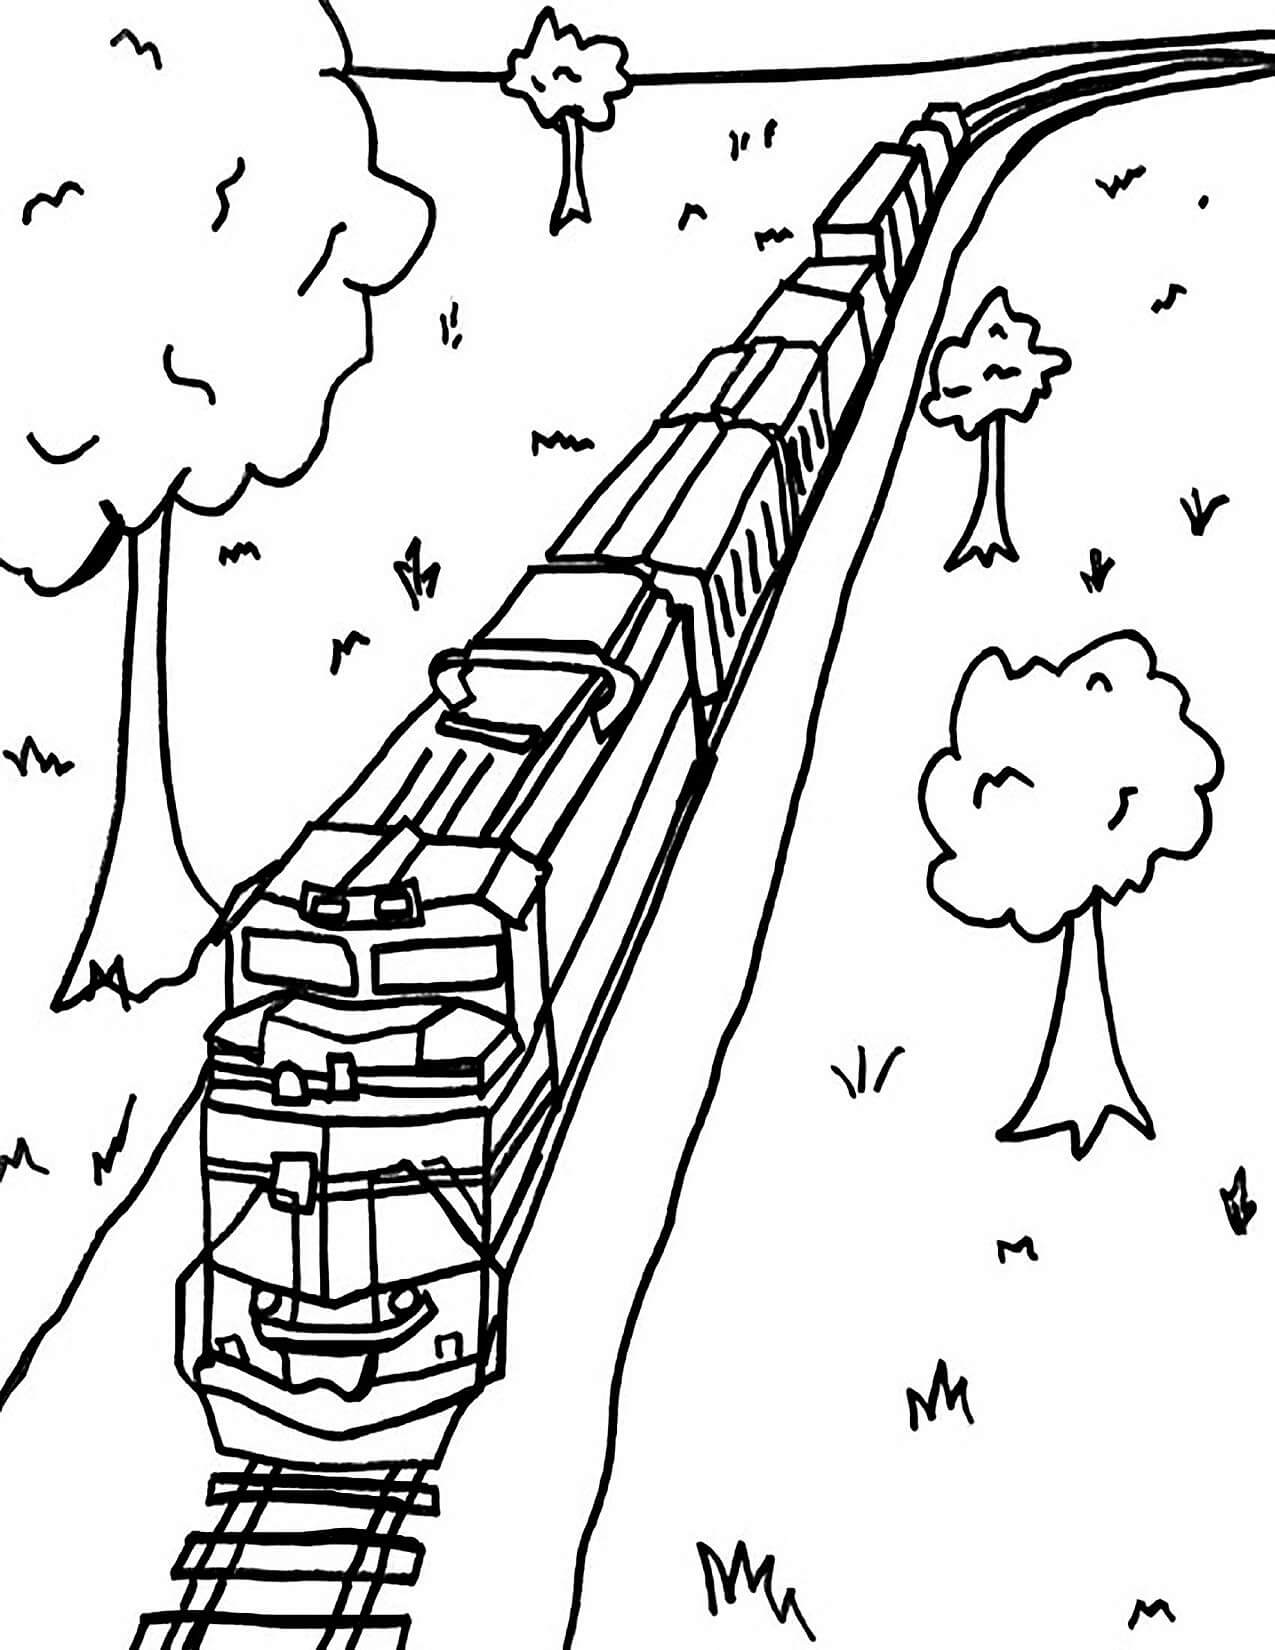 Train with trees coloring page